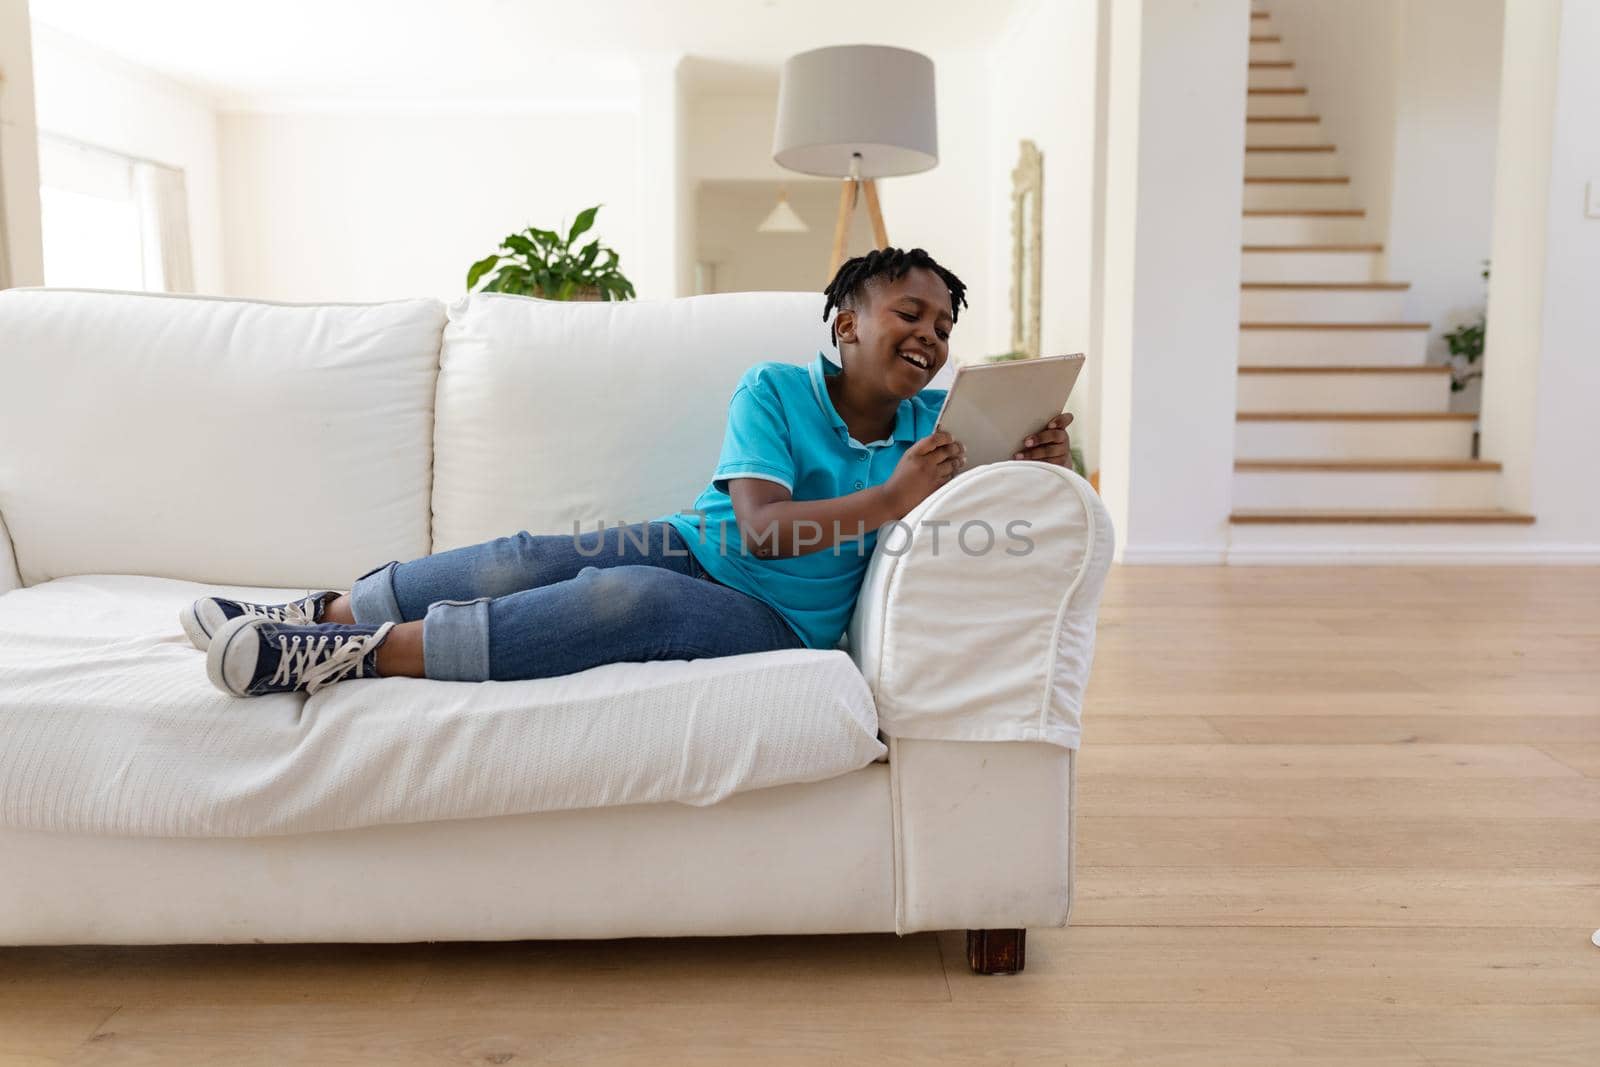 Smiling african american boy with short dreadlocks lying on couch using digital tablet. staying at home in isolation during quarantine lockdown.